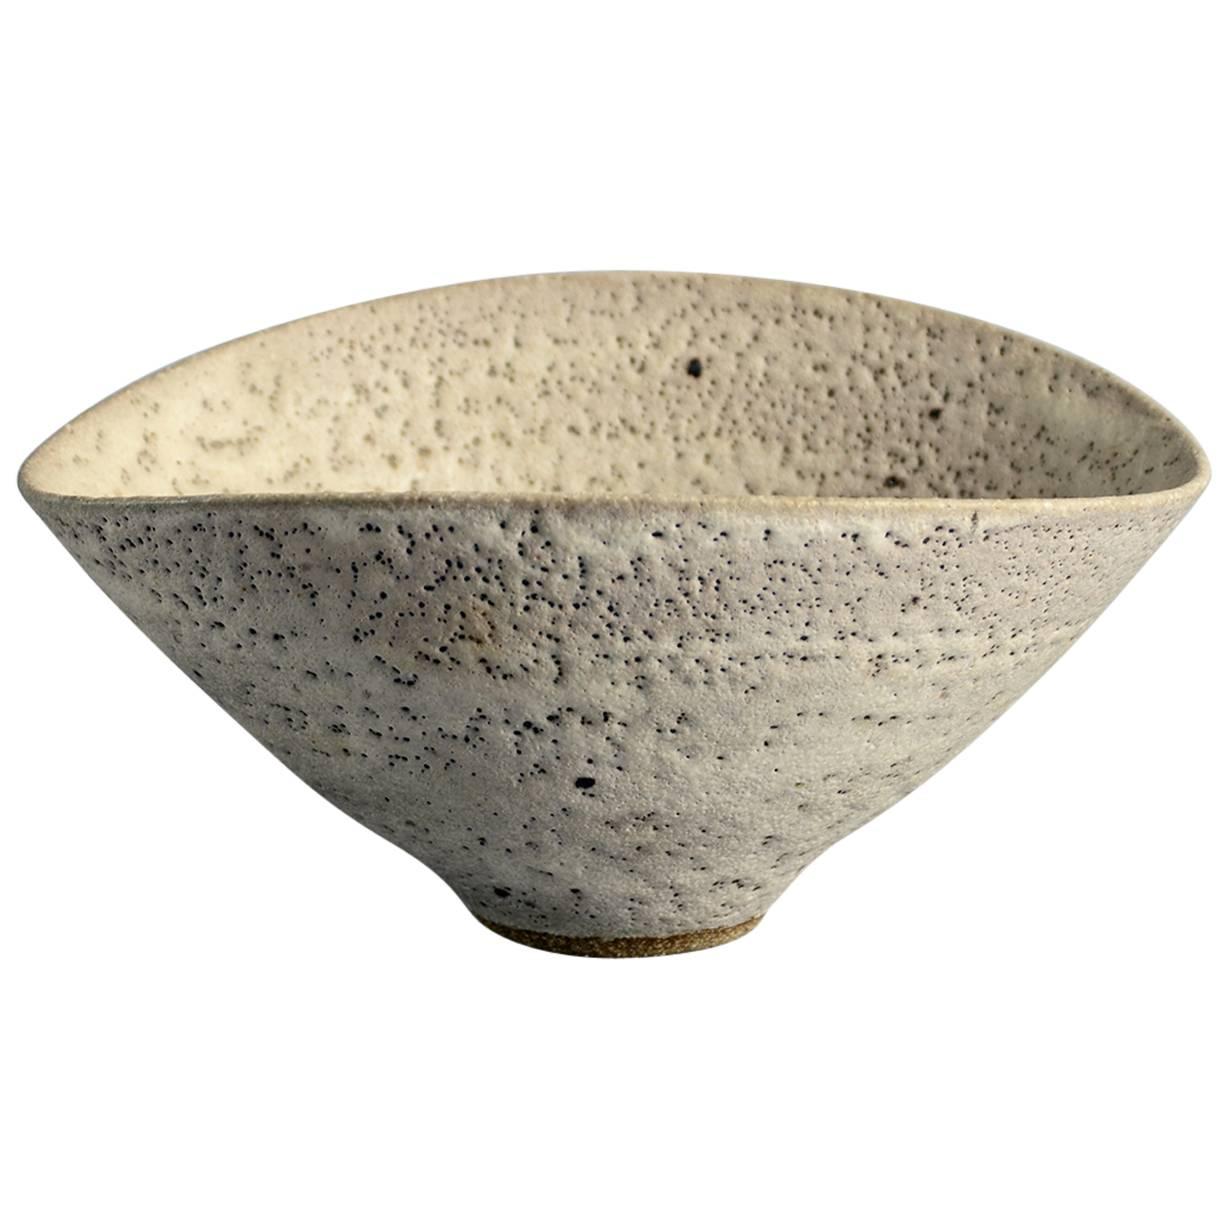 Bowl with Pitted Glaze by Lucie Rie